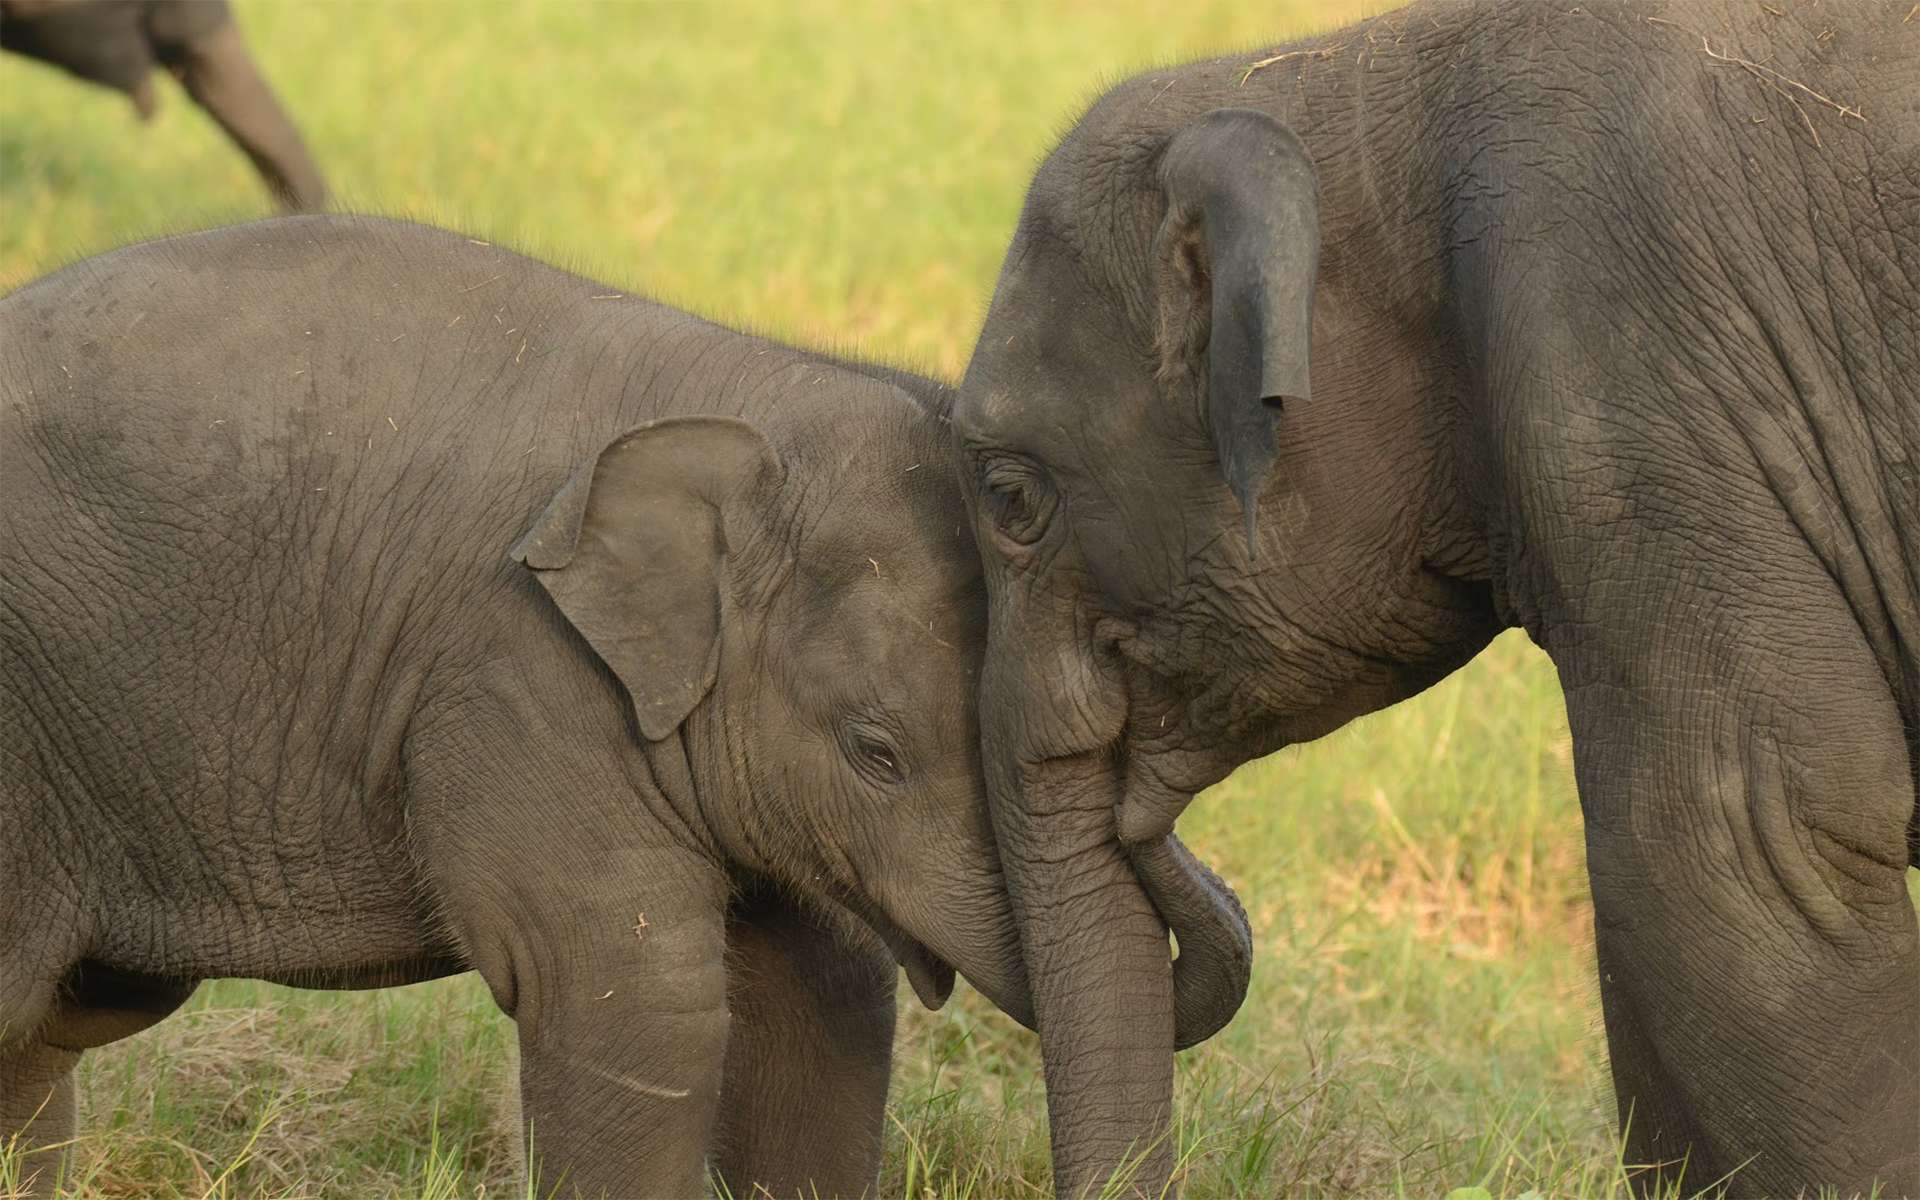 Baby elephant and mother elephant touching trunks and hugging